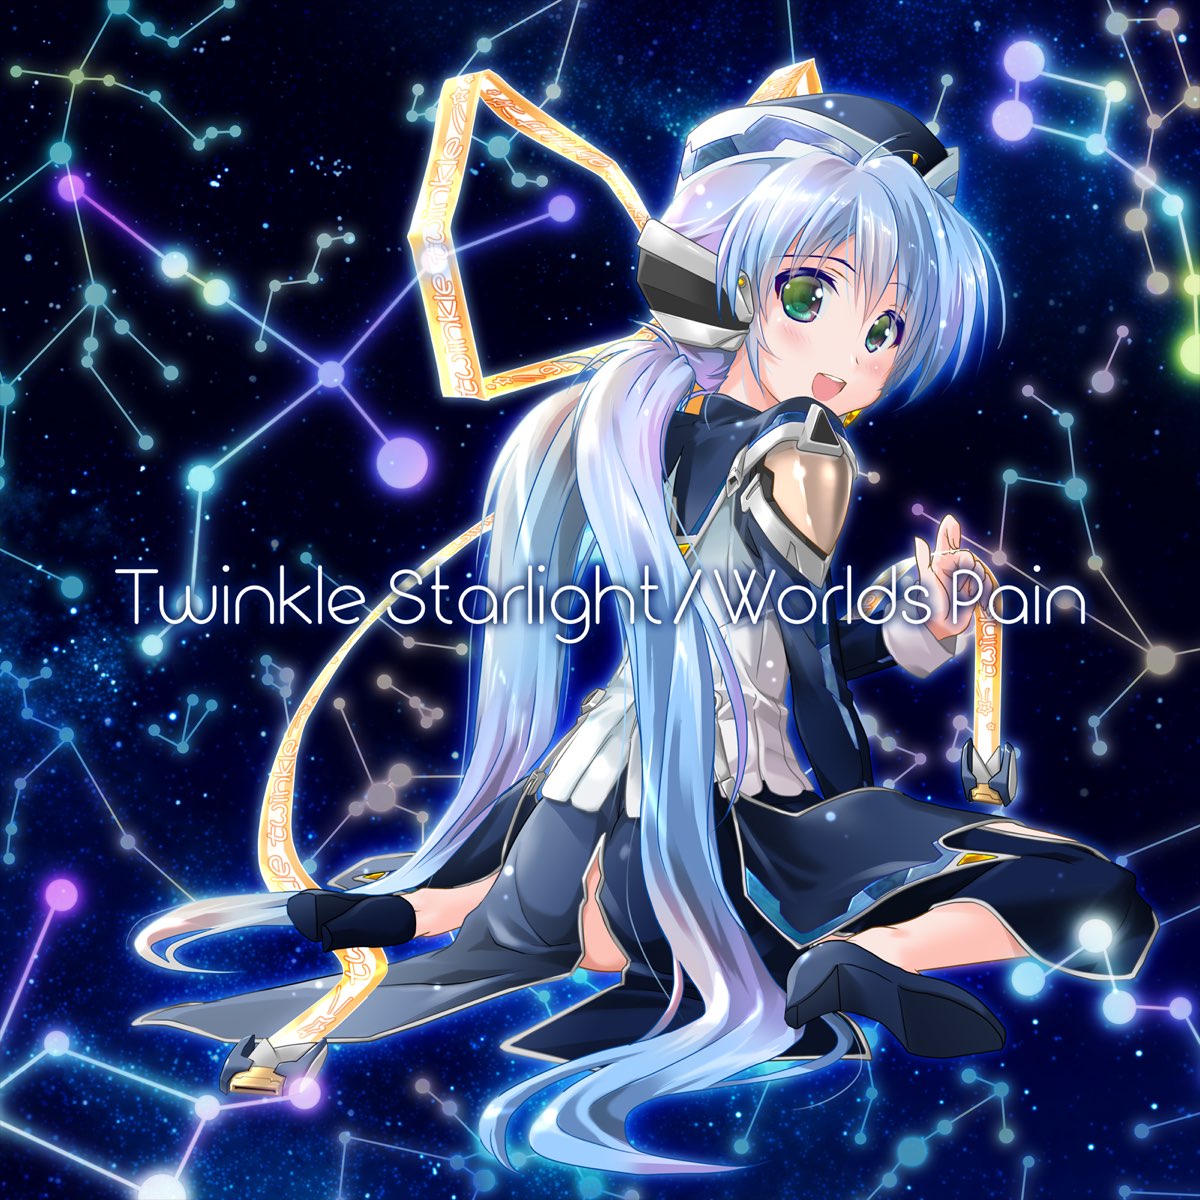 Anime Planetarian Ending Song Twinkle Starlight Image Song Worlds Pain Ep By Visualart S Key Sounds Label On Itunes